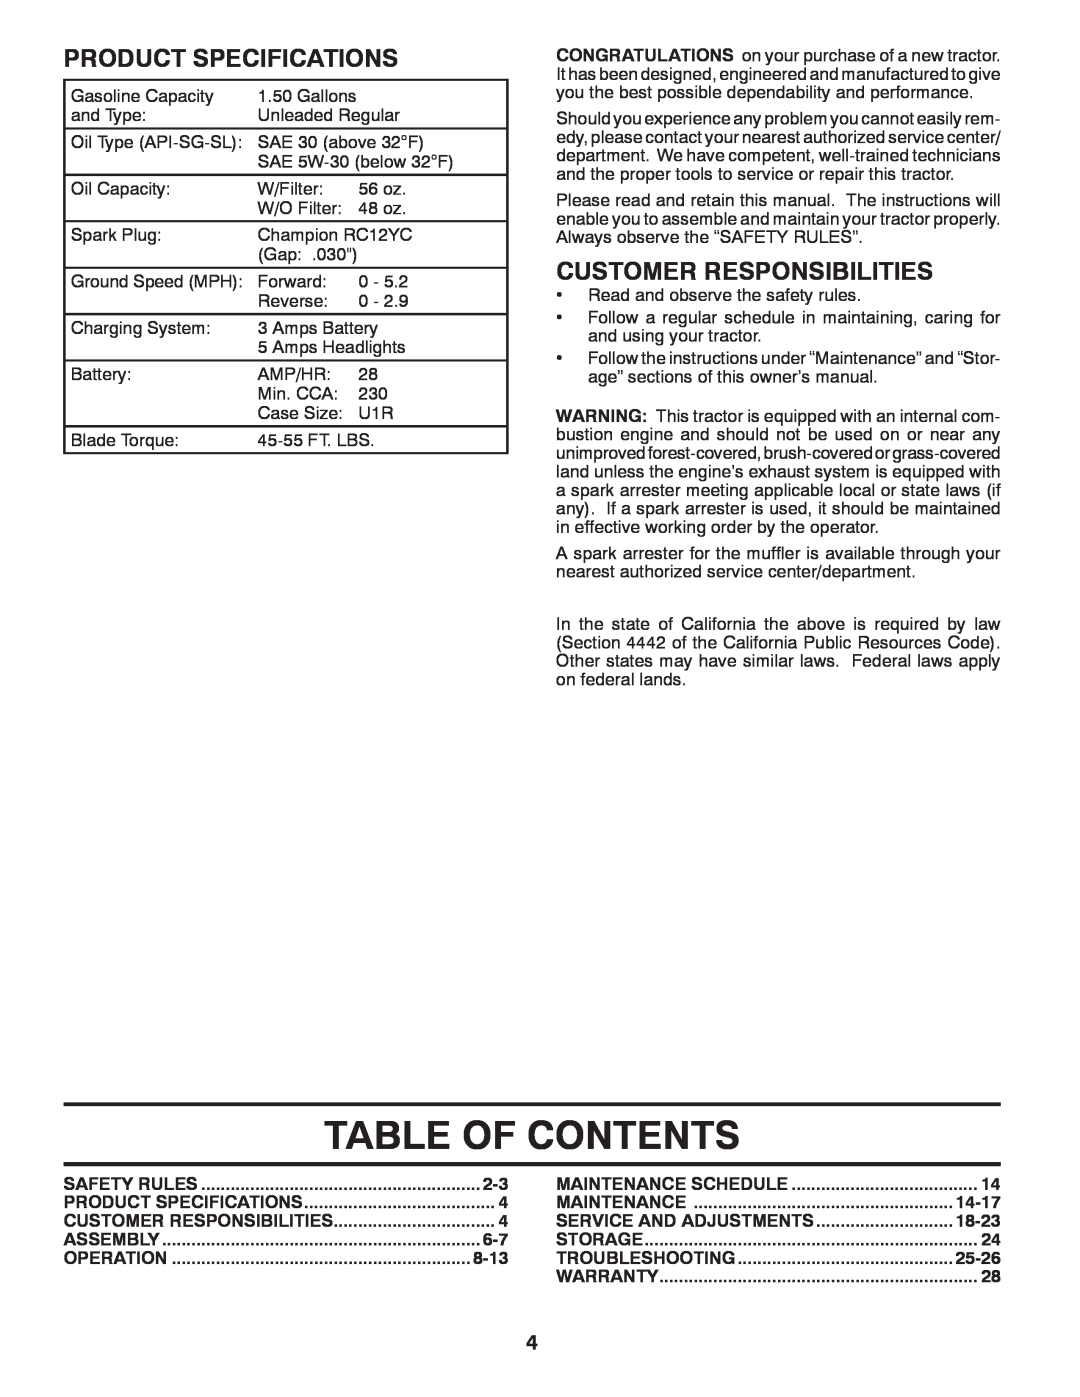 Poulan 96042010703, 34-80 manual Table Of Contents, Product Specifications, Customer Responsibilities 